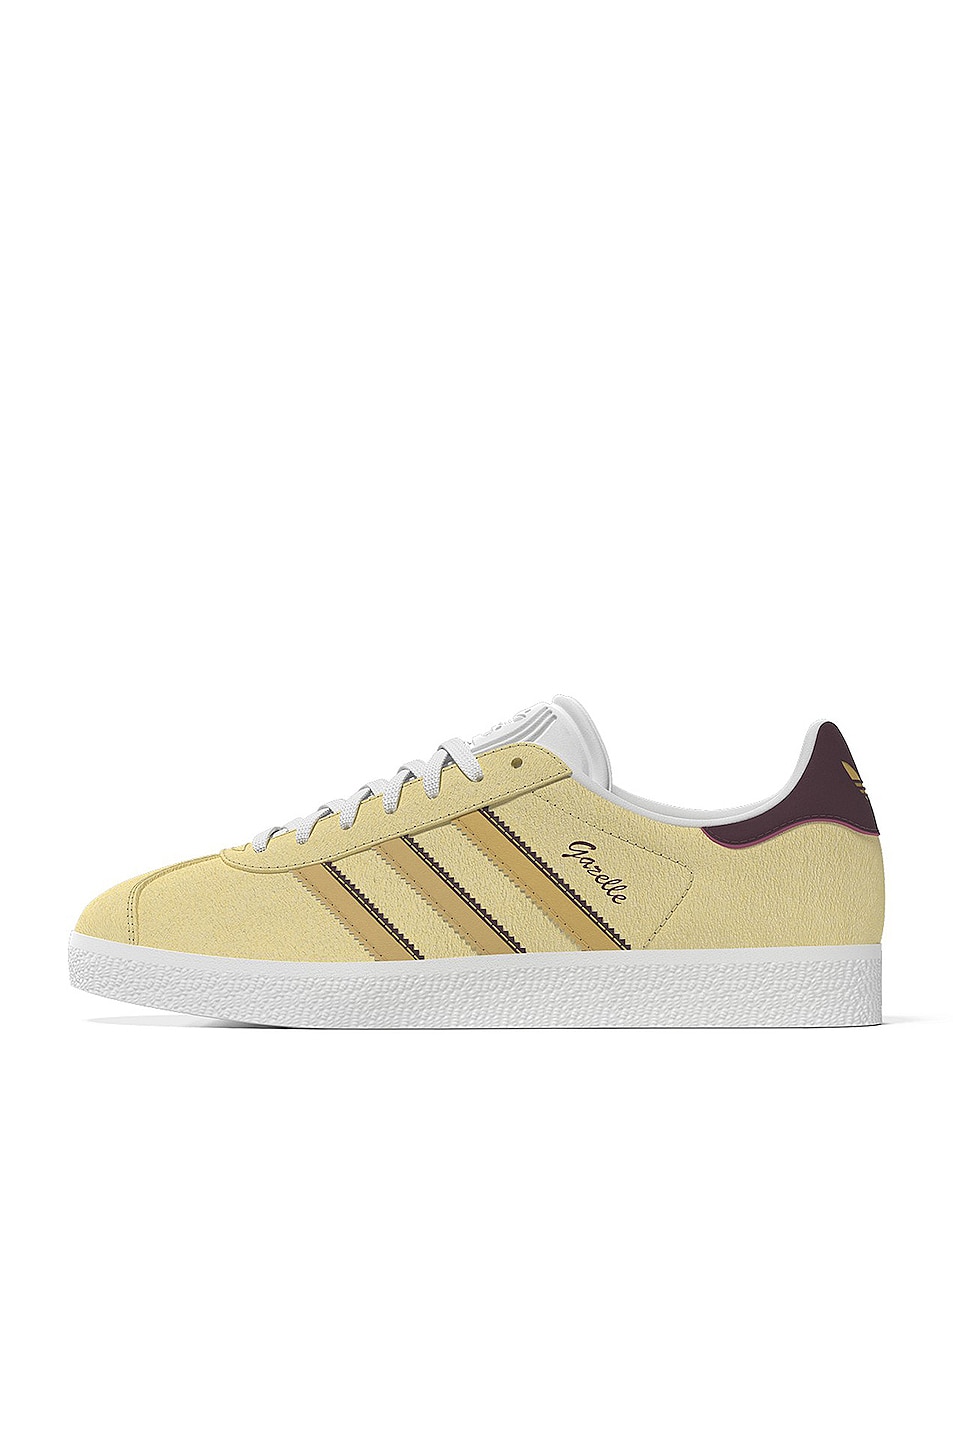 Shop Adidas Originals Gazelle In Almost Yellow  Oat  And Maroon